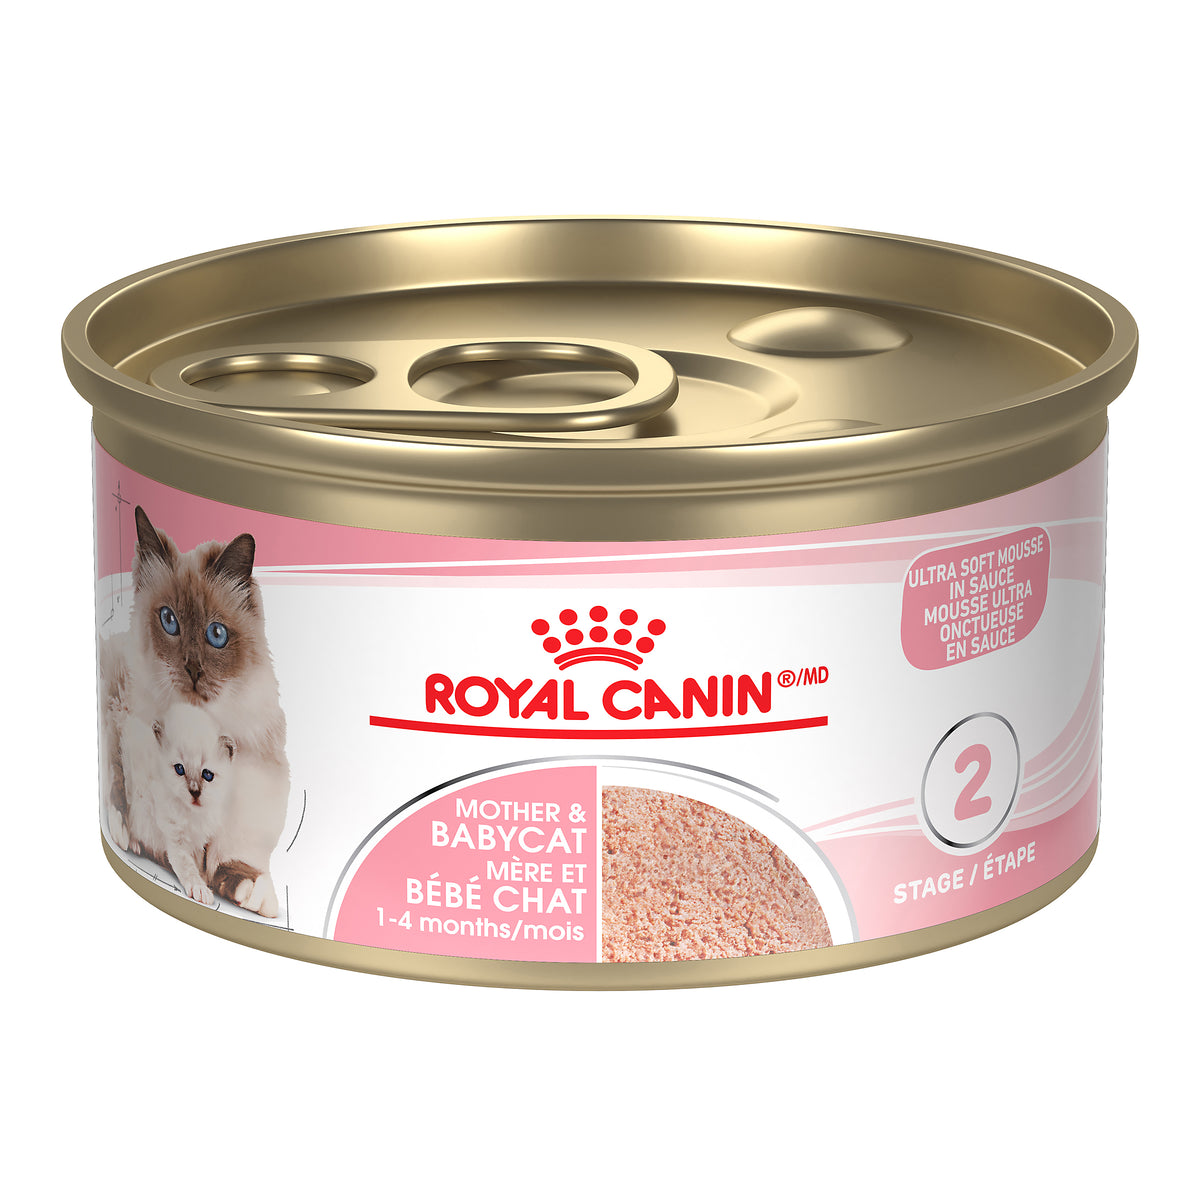 Royal Canin Mother &amp; Babycat Ultra Soft Mousse (85g) - Wet Canned cat food